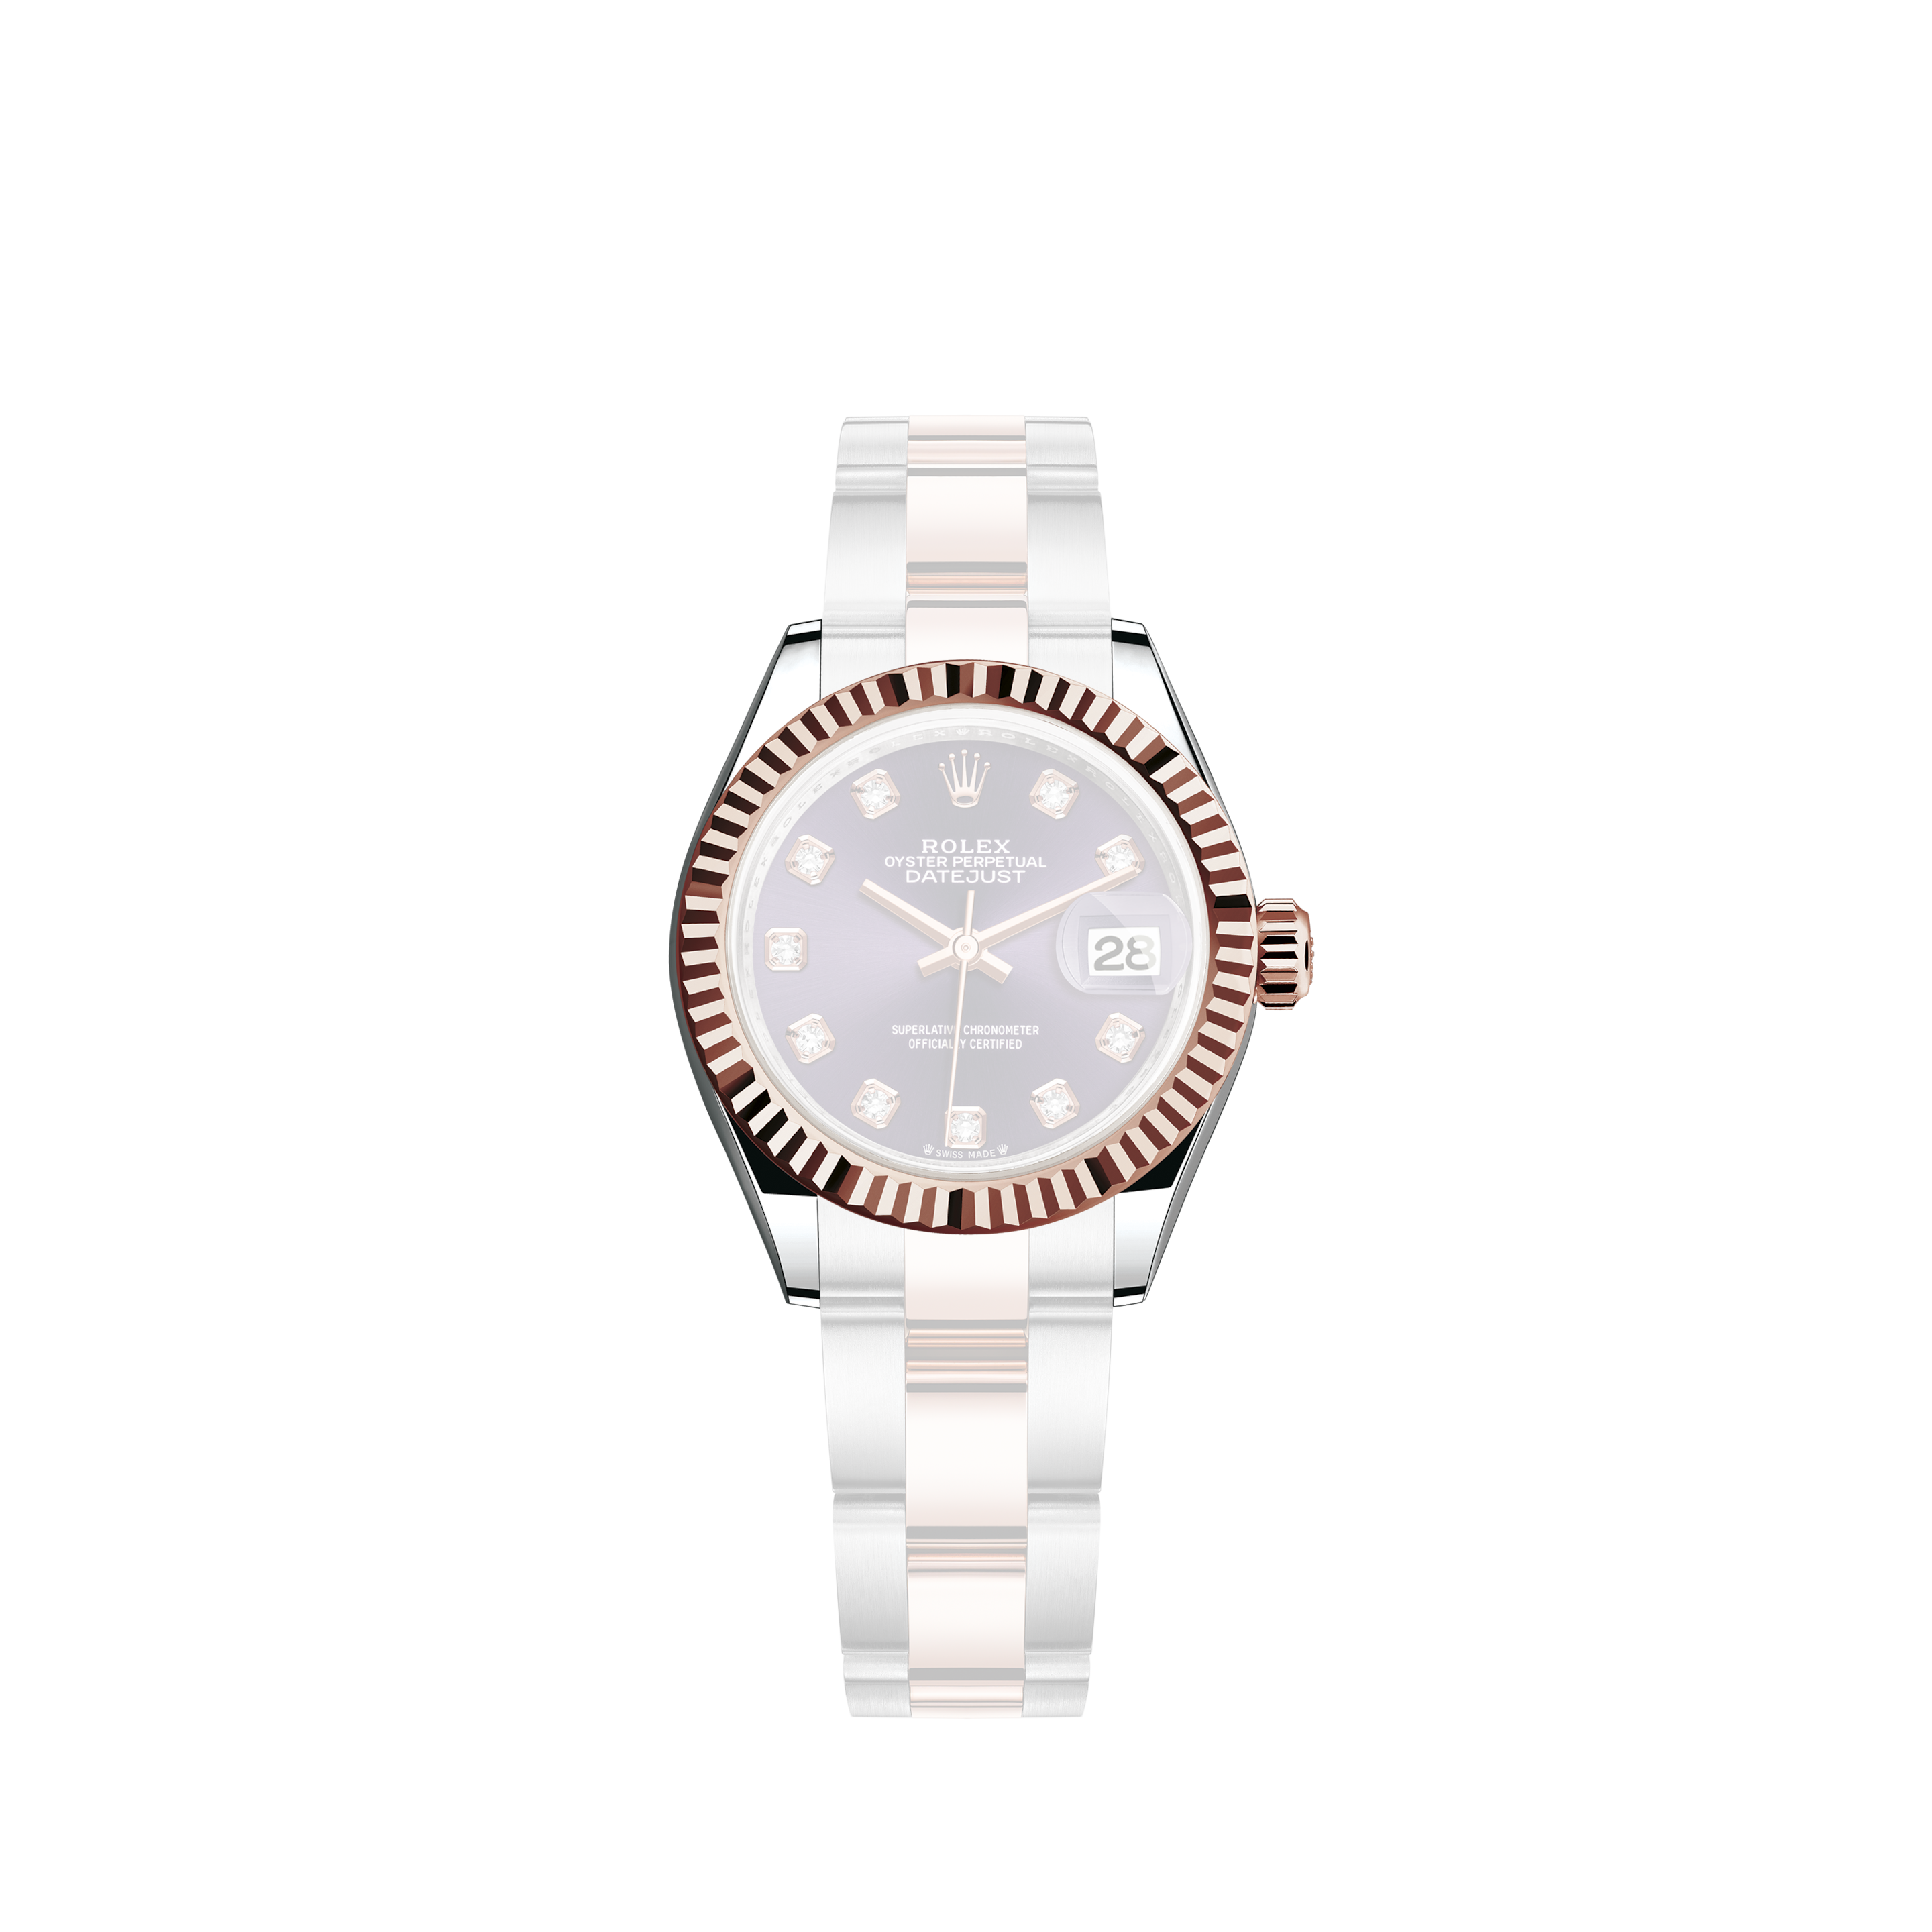 Rolex Cellini 18K (0.750) White Gold Hand-held Elevator Unisex Gold Ref. 4312Rolex Cellini 18K Everose Gold Dual Time Automatic 50525